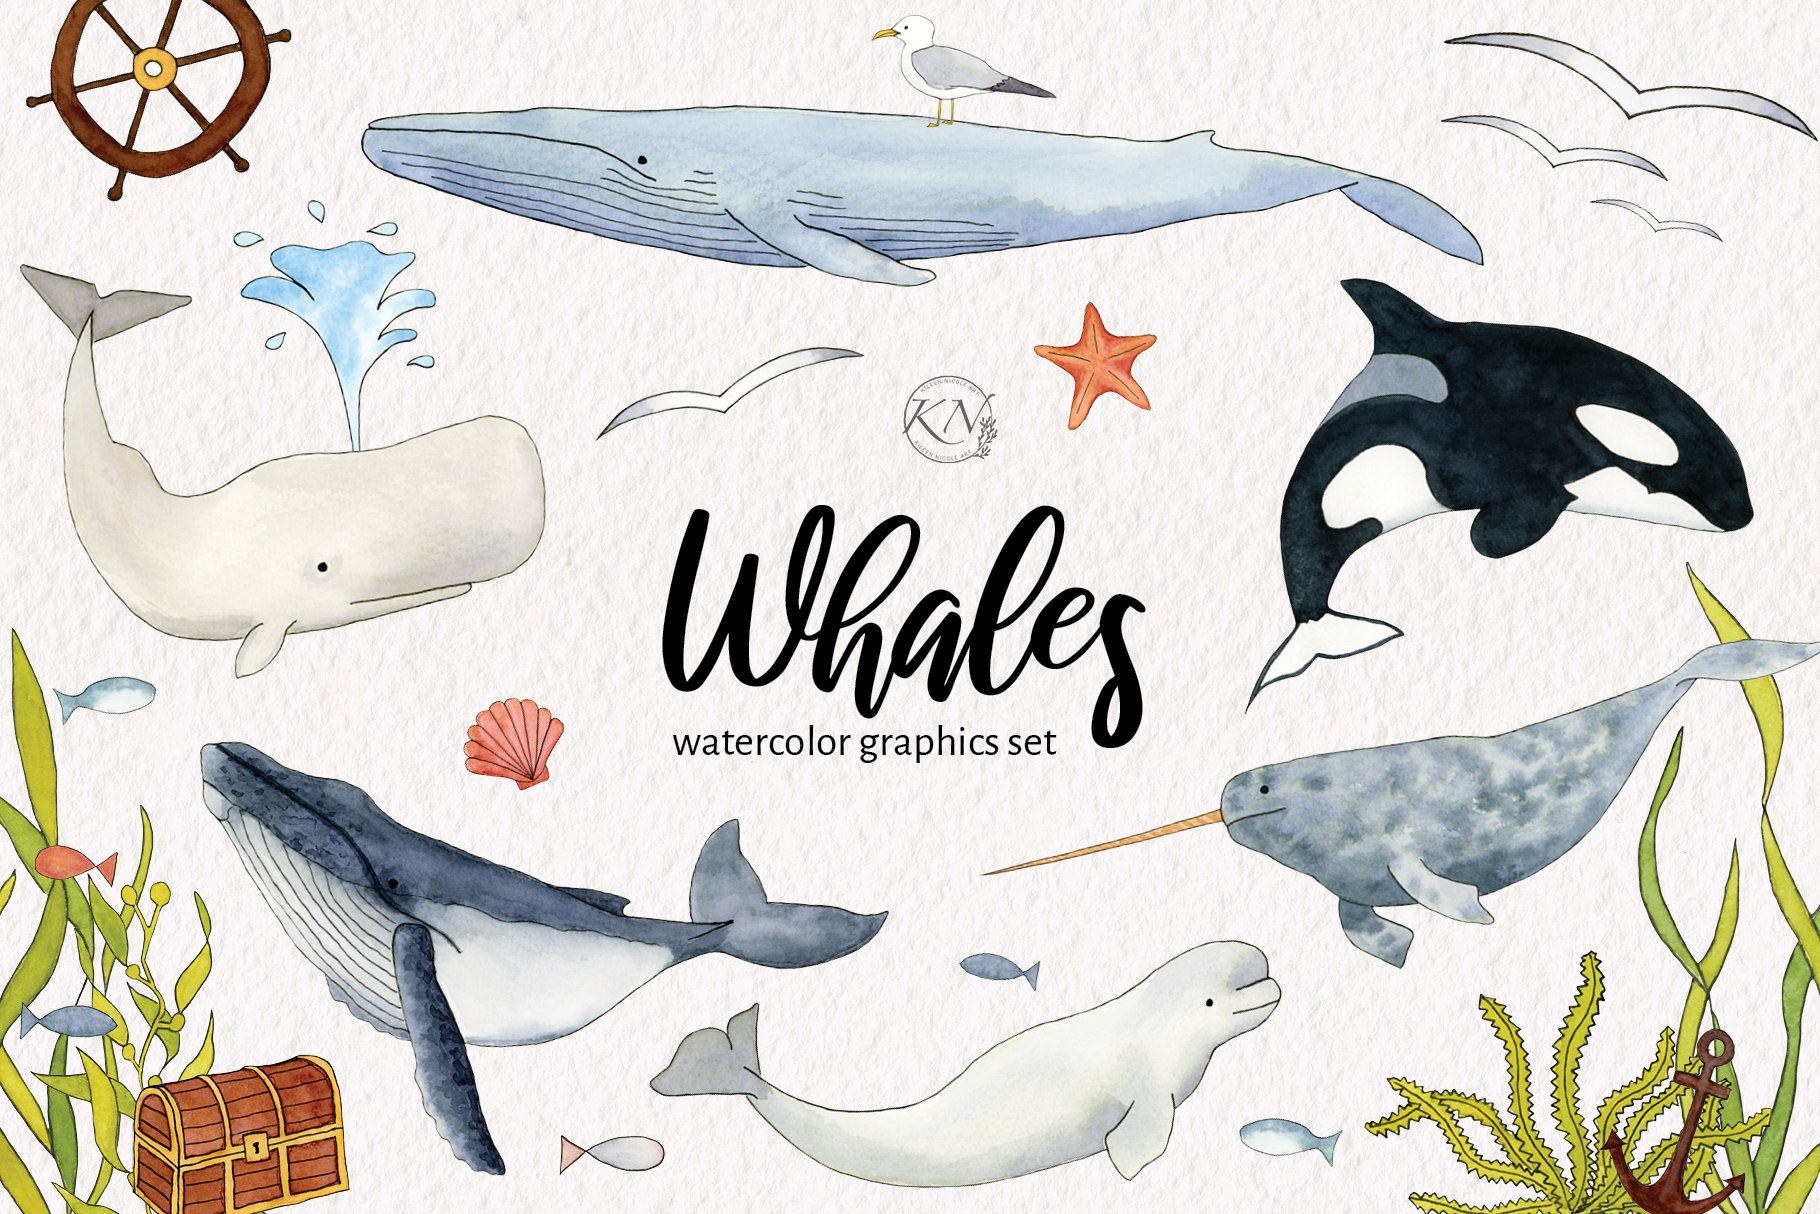 Watercolor Whales Graphics cover image.